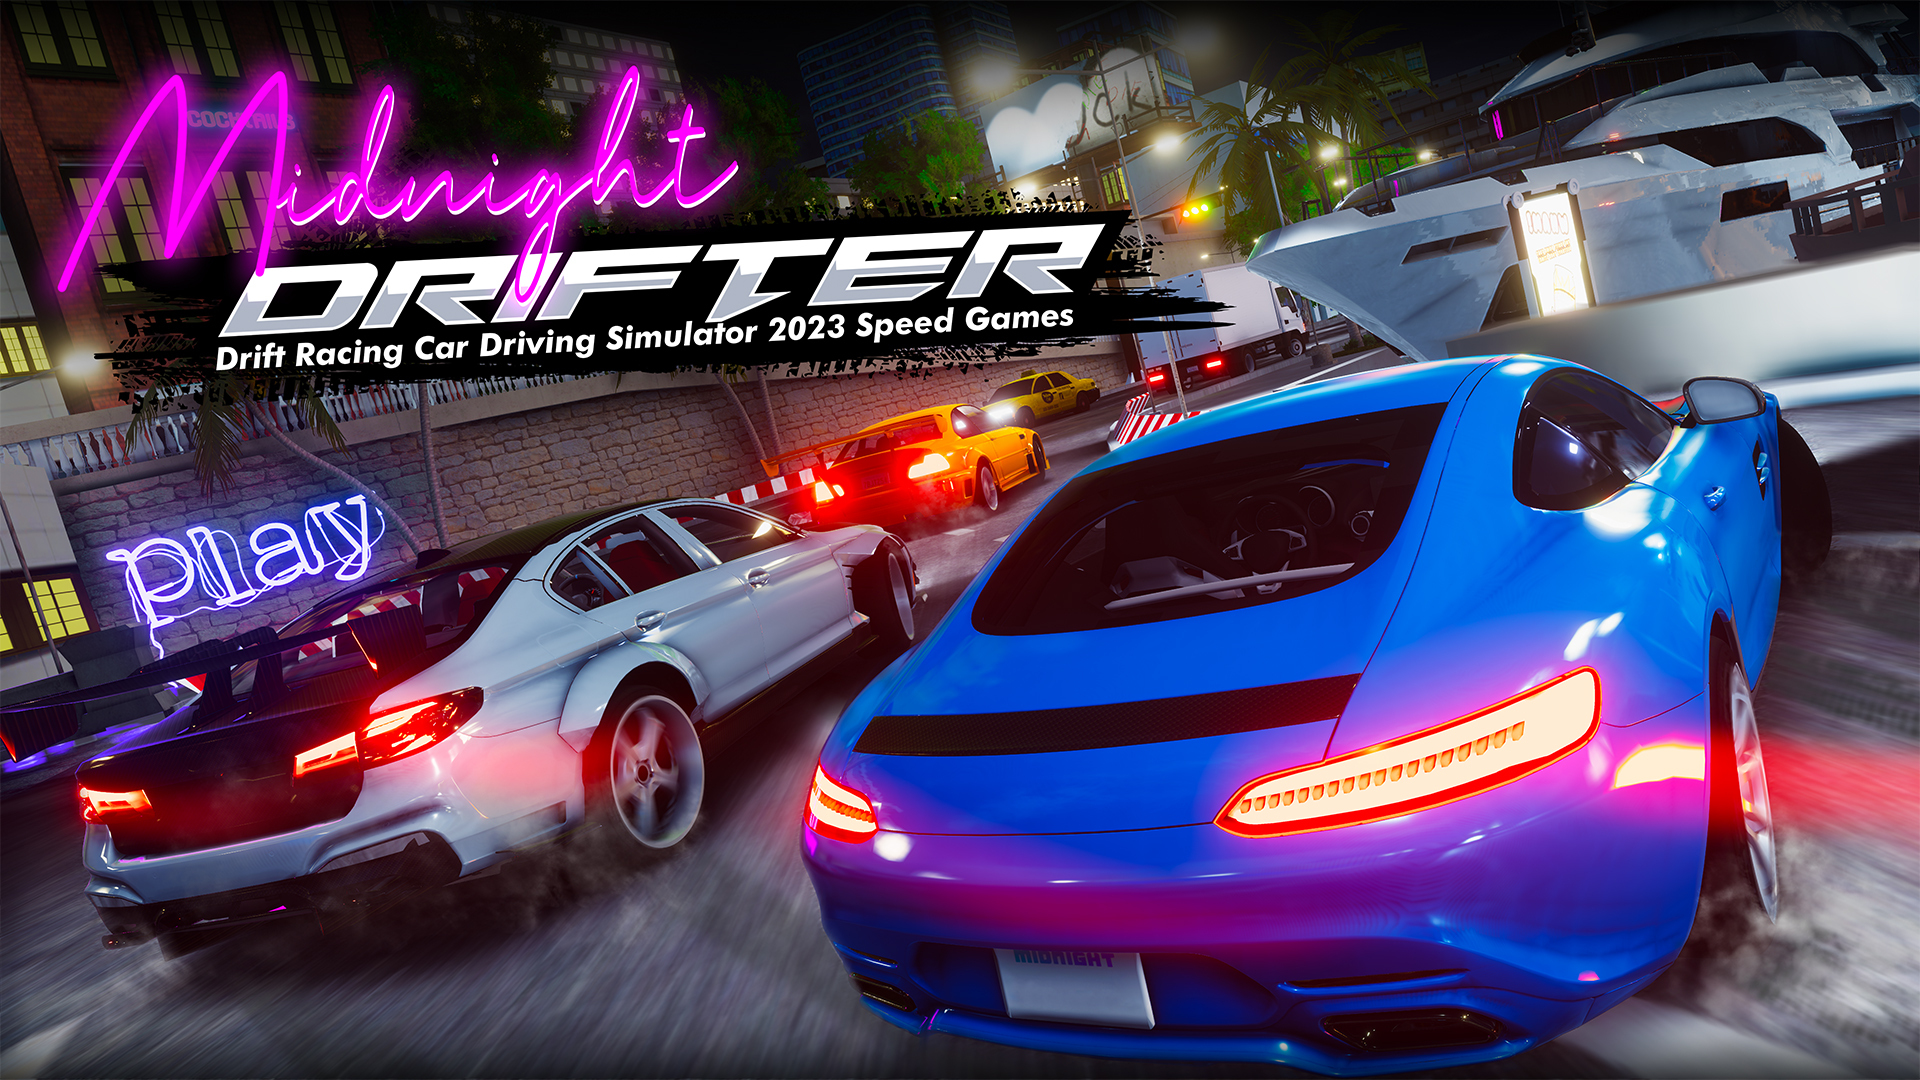 Car Racing Highway Driving Simulator, real parking driver sim speed traffic  deluxe 2022 for Nintendo Switch - Nintendo Official Site